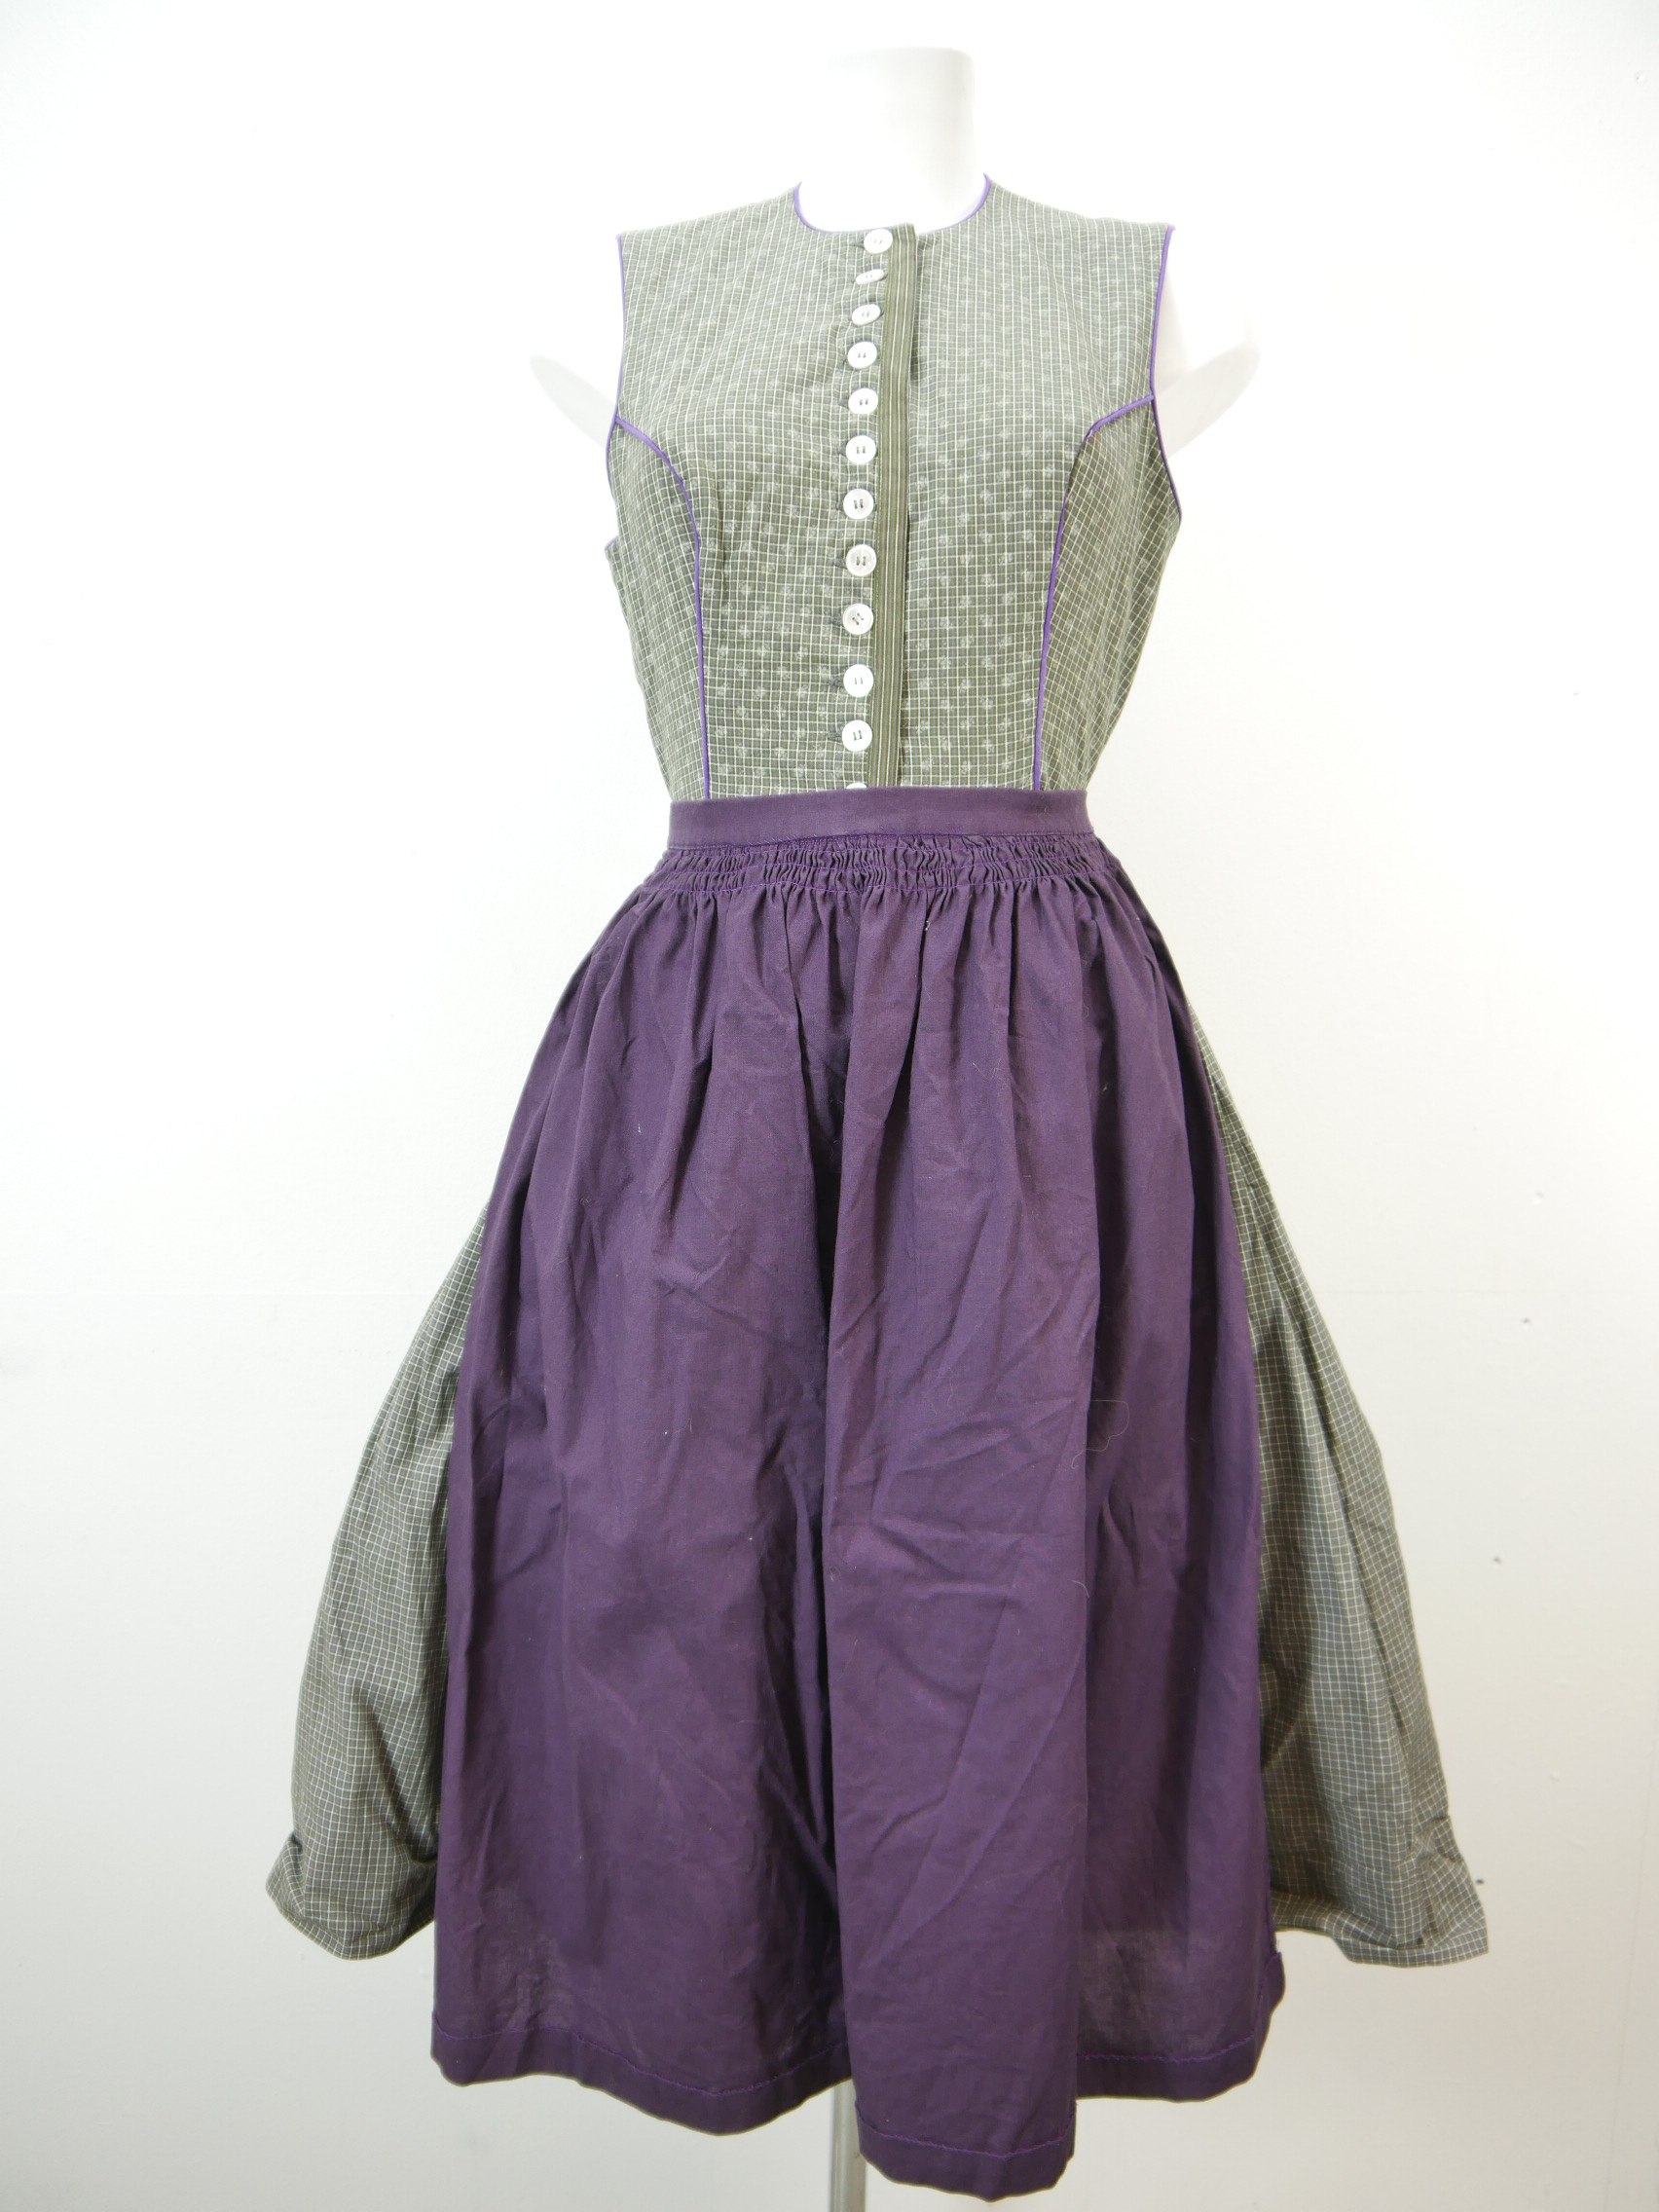 Isola Austria green with Viennese seam fabulous dirndl with apron size 40